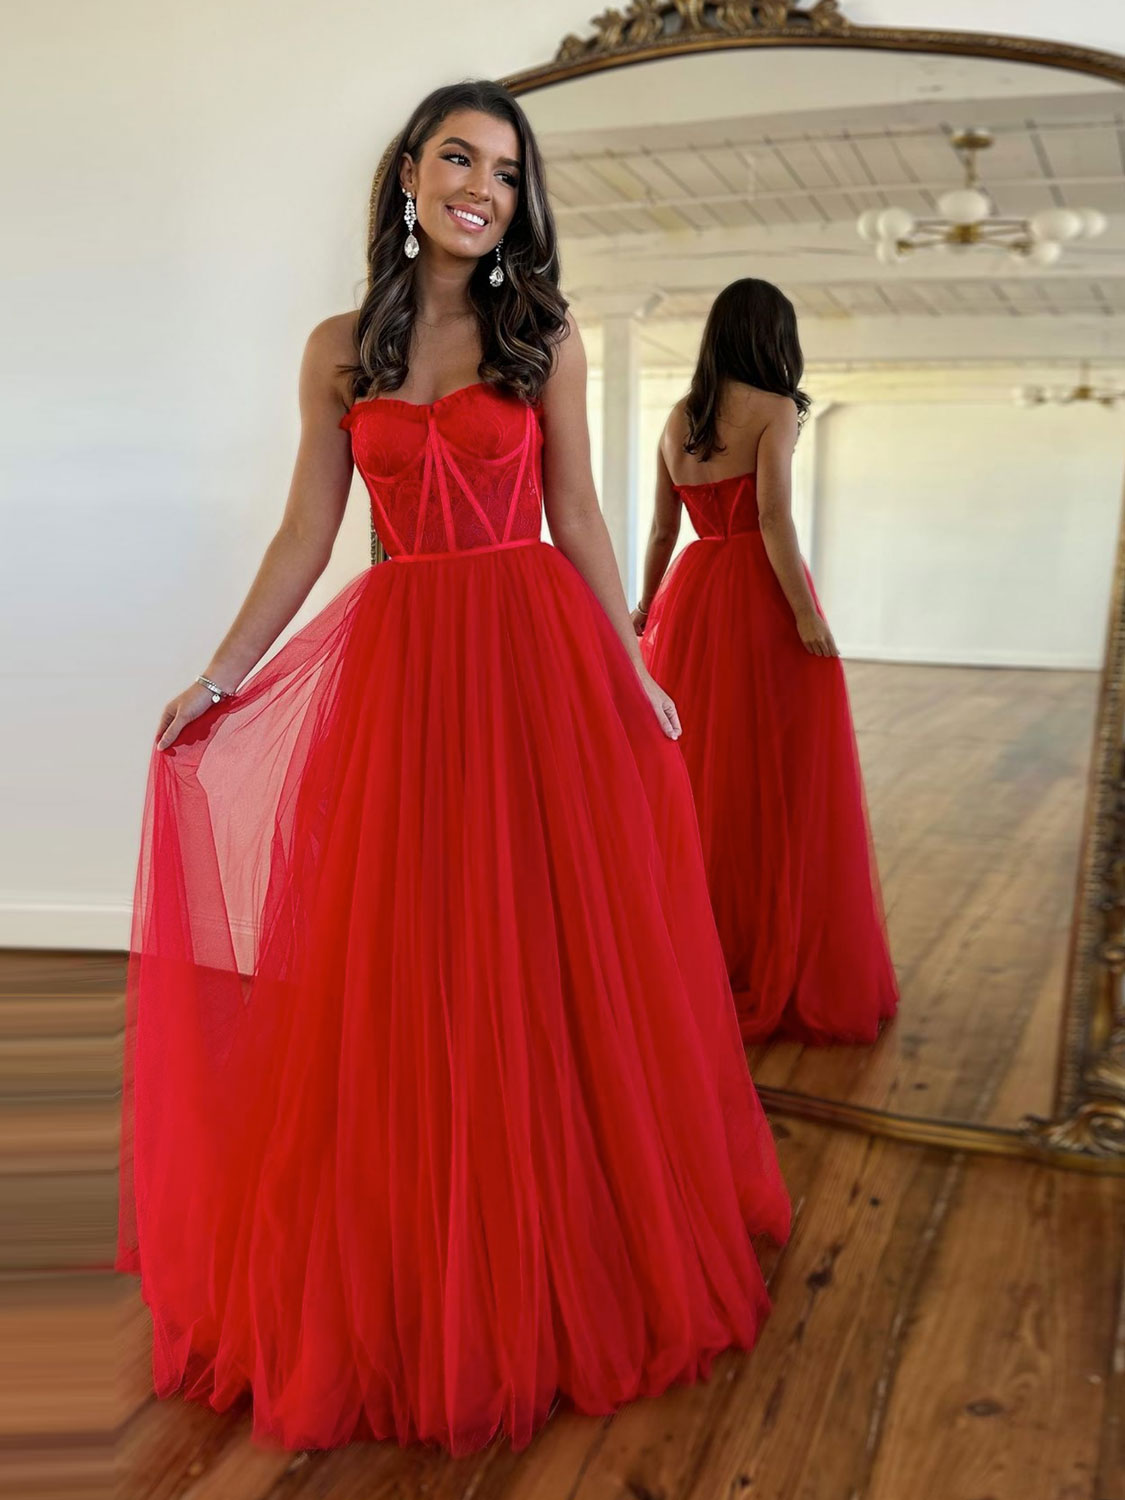 Red Lace Dress, Red Wedding Dress, Red Cocktail Dress, Red Lace